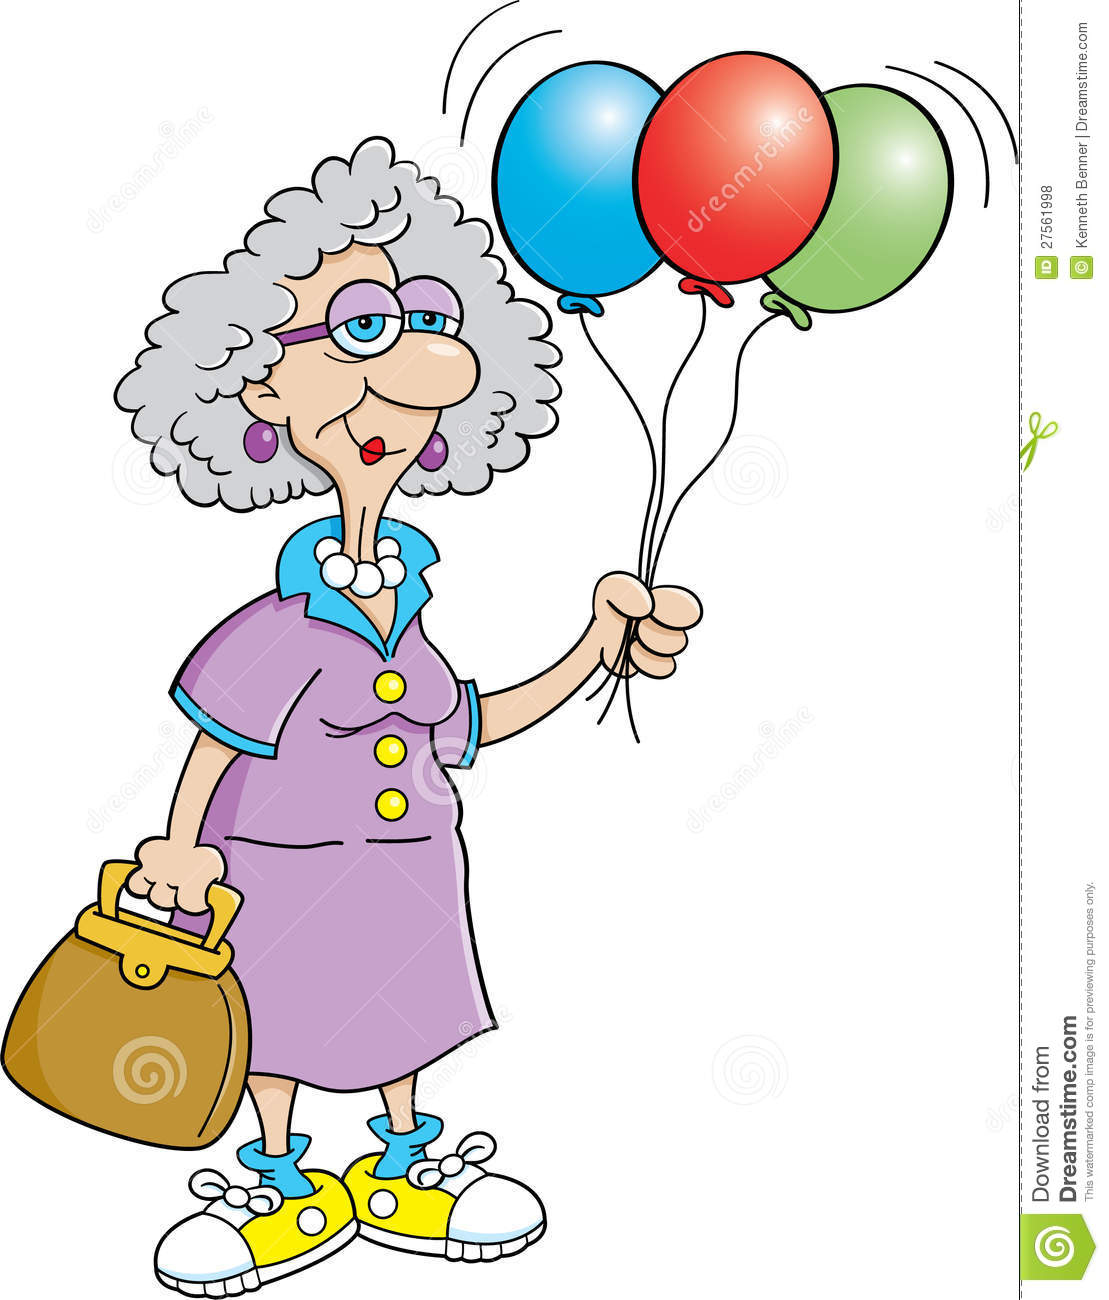 520 Old People free clipart.